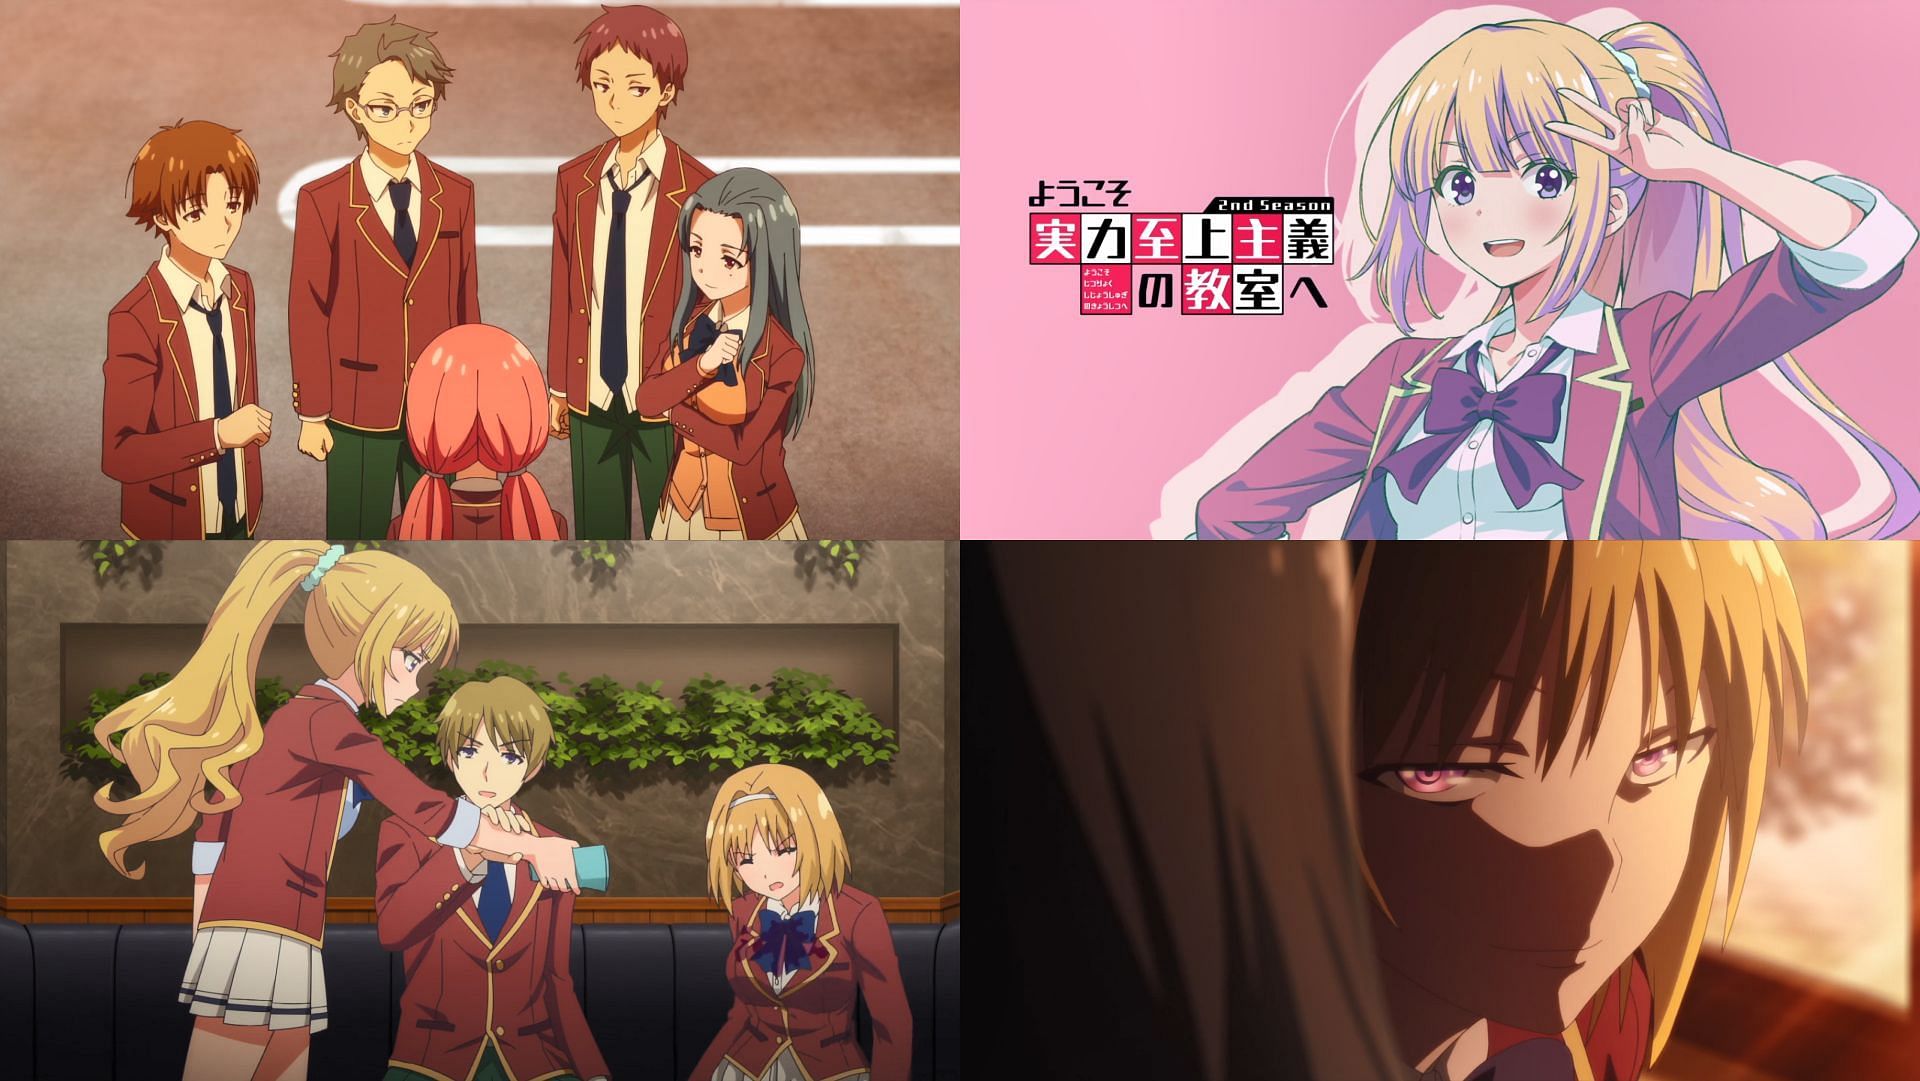 Classroom Of The Elite Season 2 Episode 11 Review: Torturing The